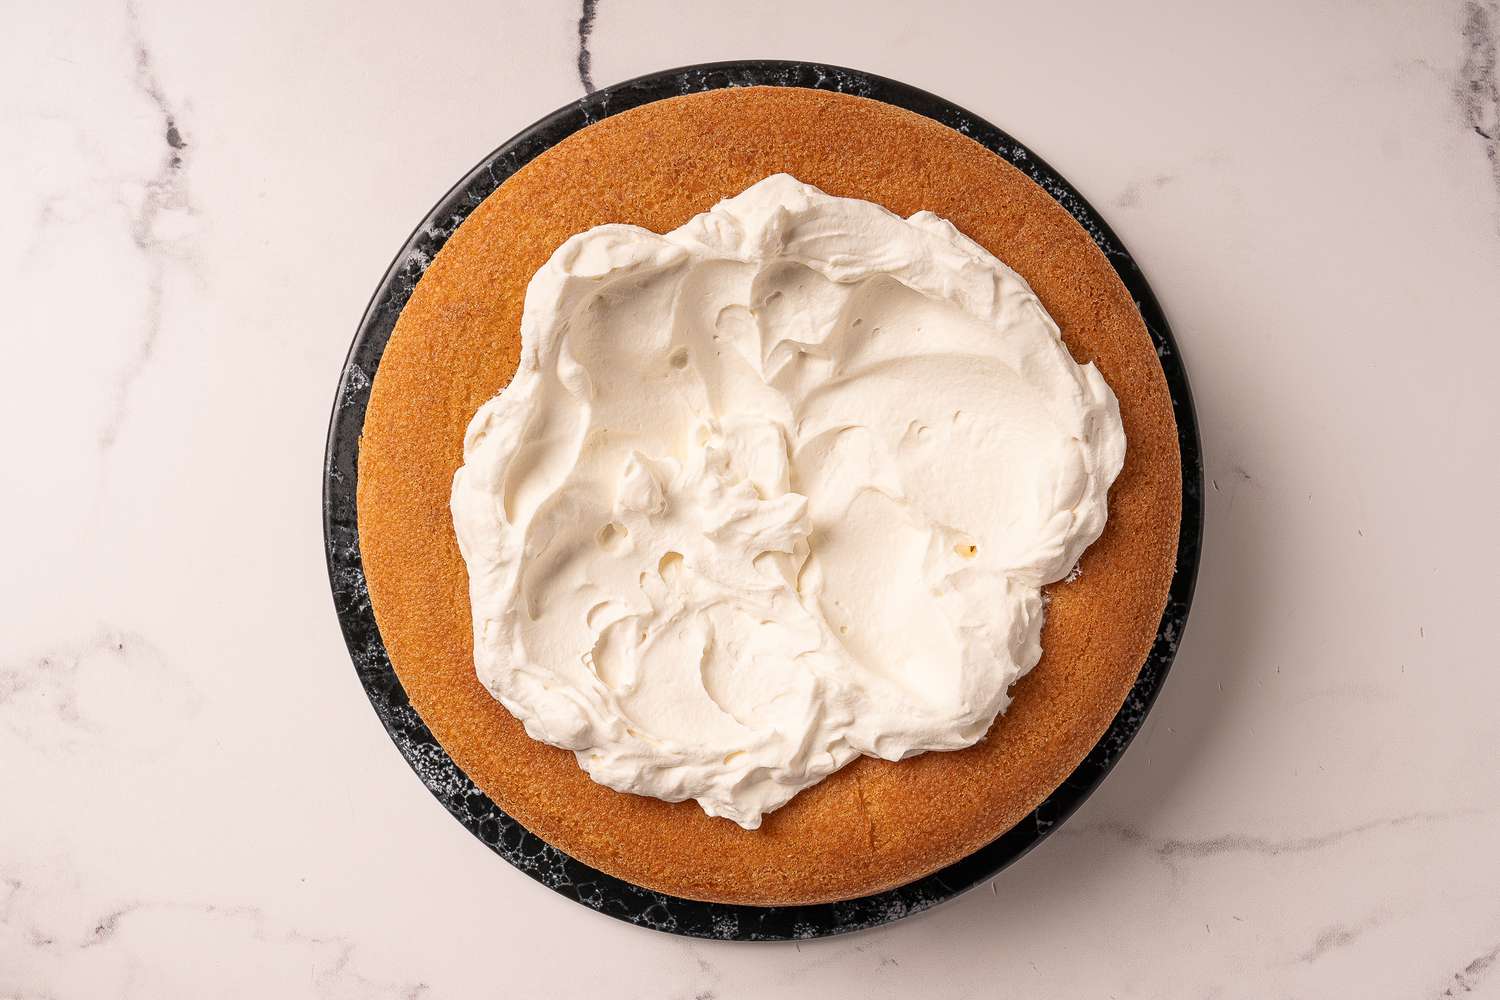 Savarin with whipped cream in the center